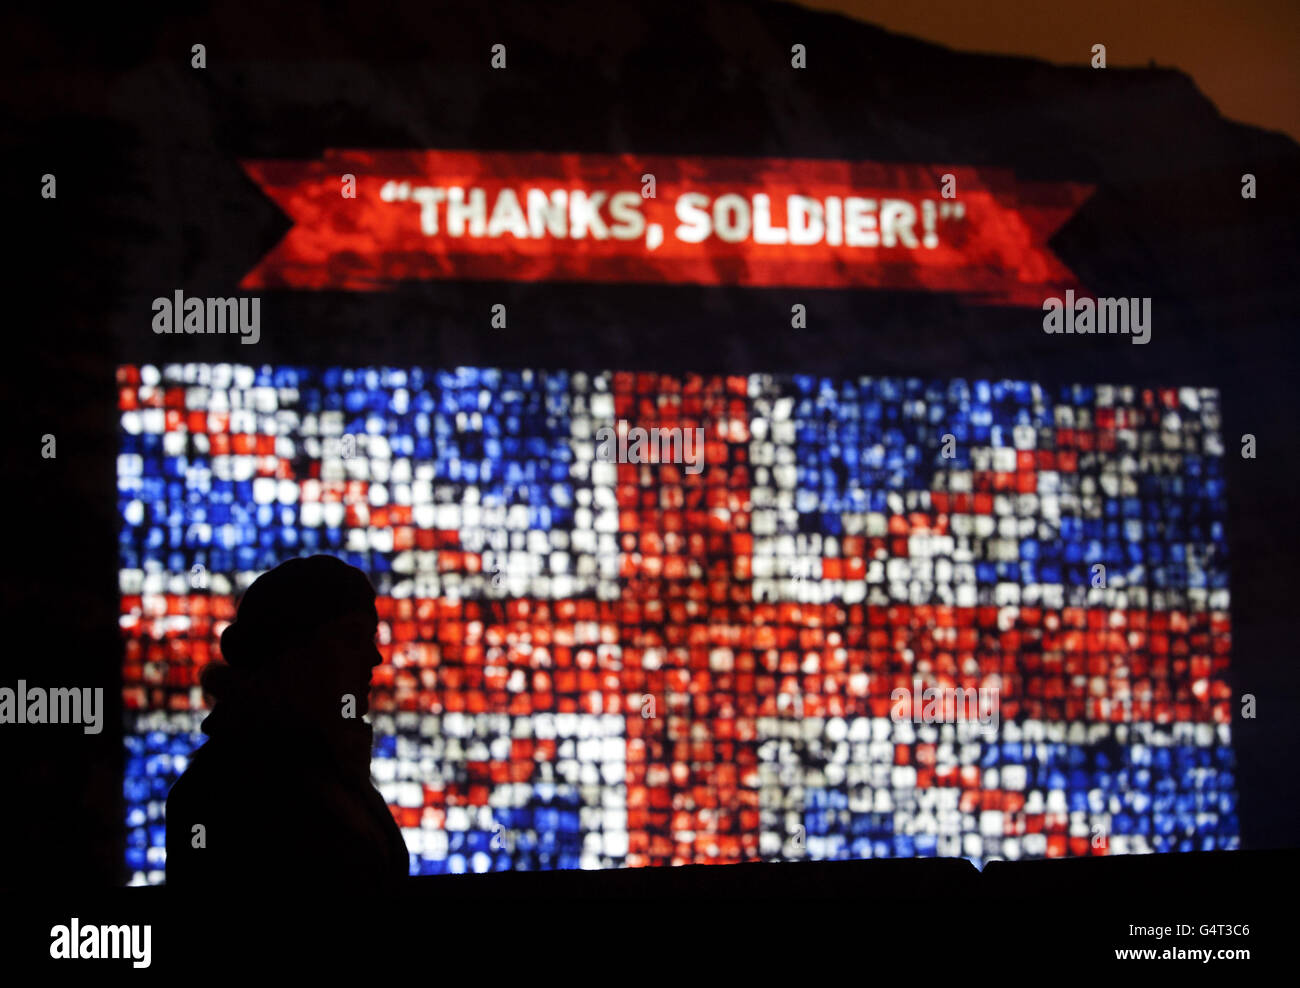 Abf The Soldiers Charity Projection Stock Photo 106250374 Alamy